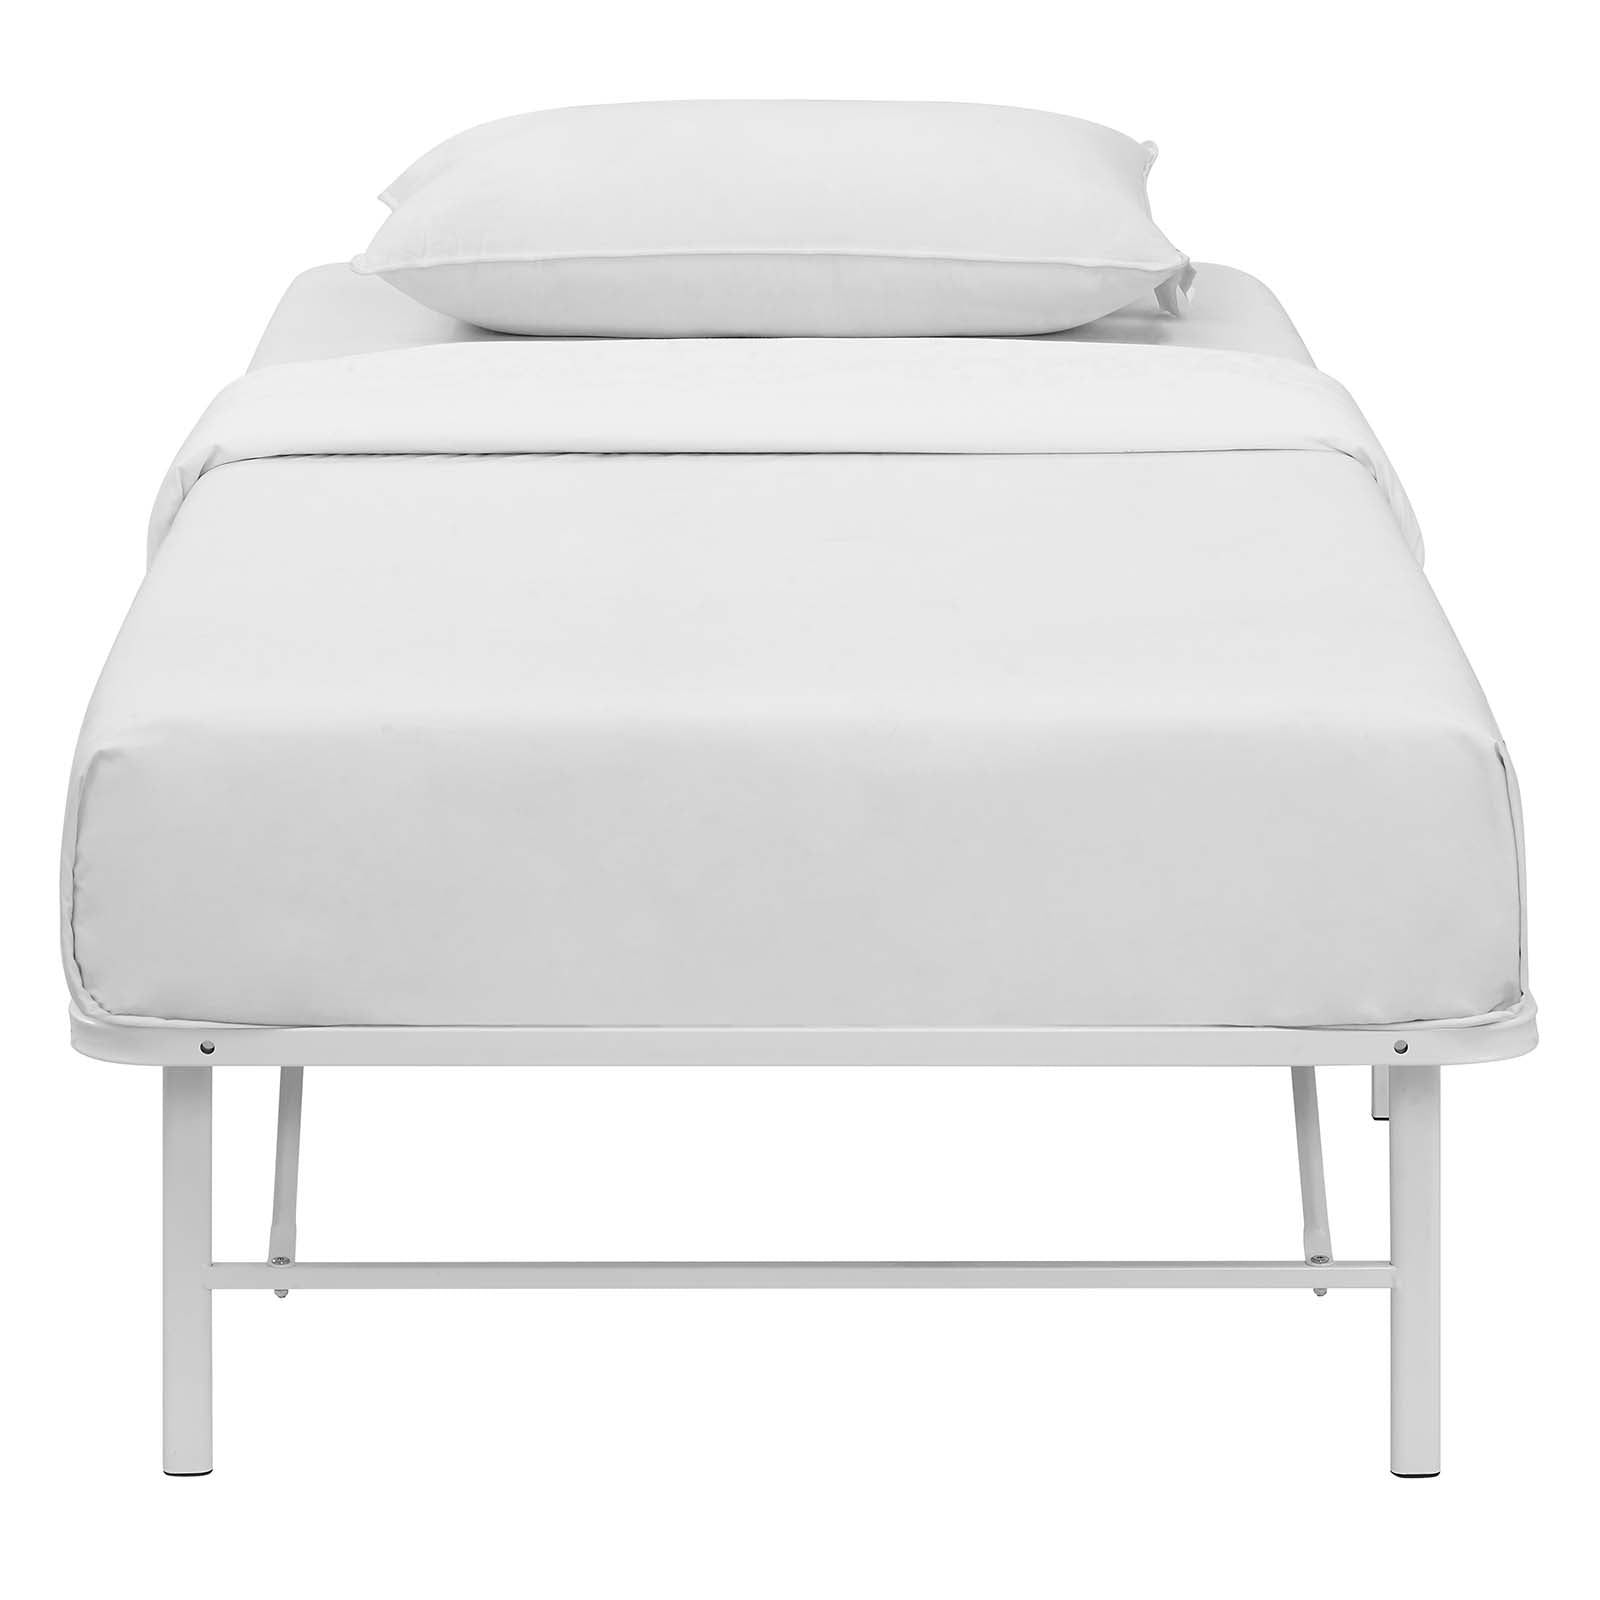 Modway Beds - Horizon Twin Stainless Steel Bed Frame White